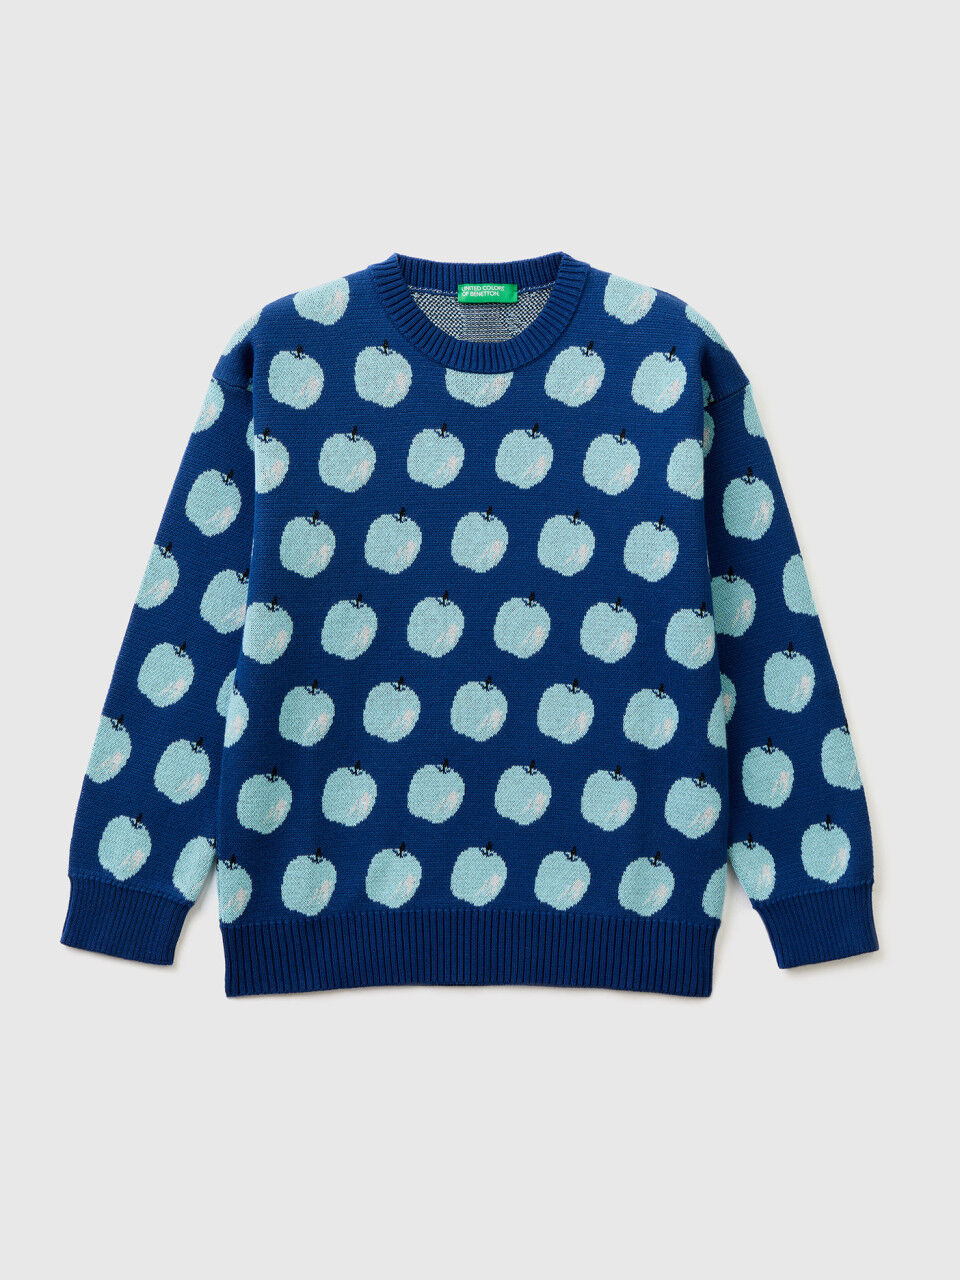 Blue sweater with apple pattern